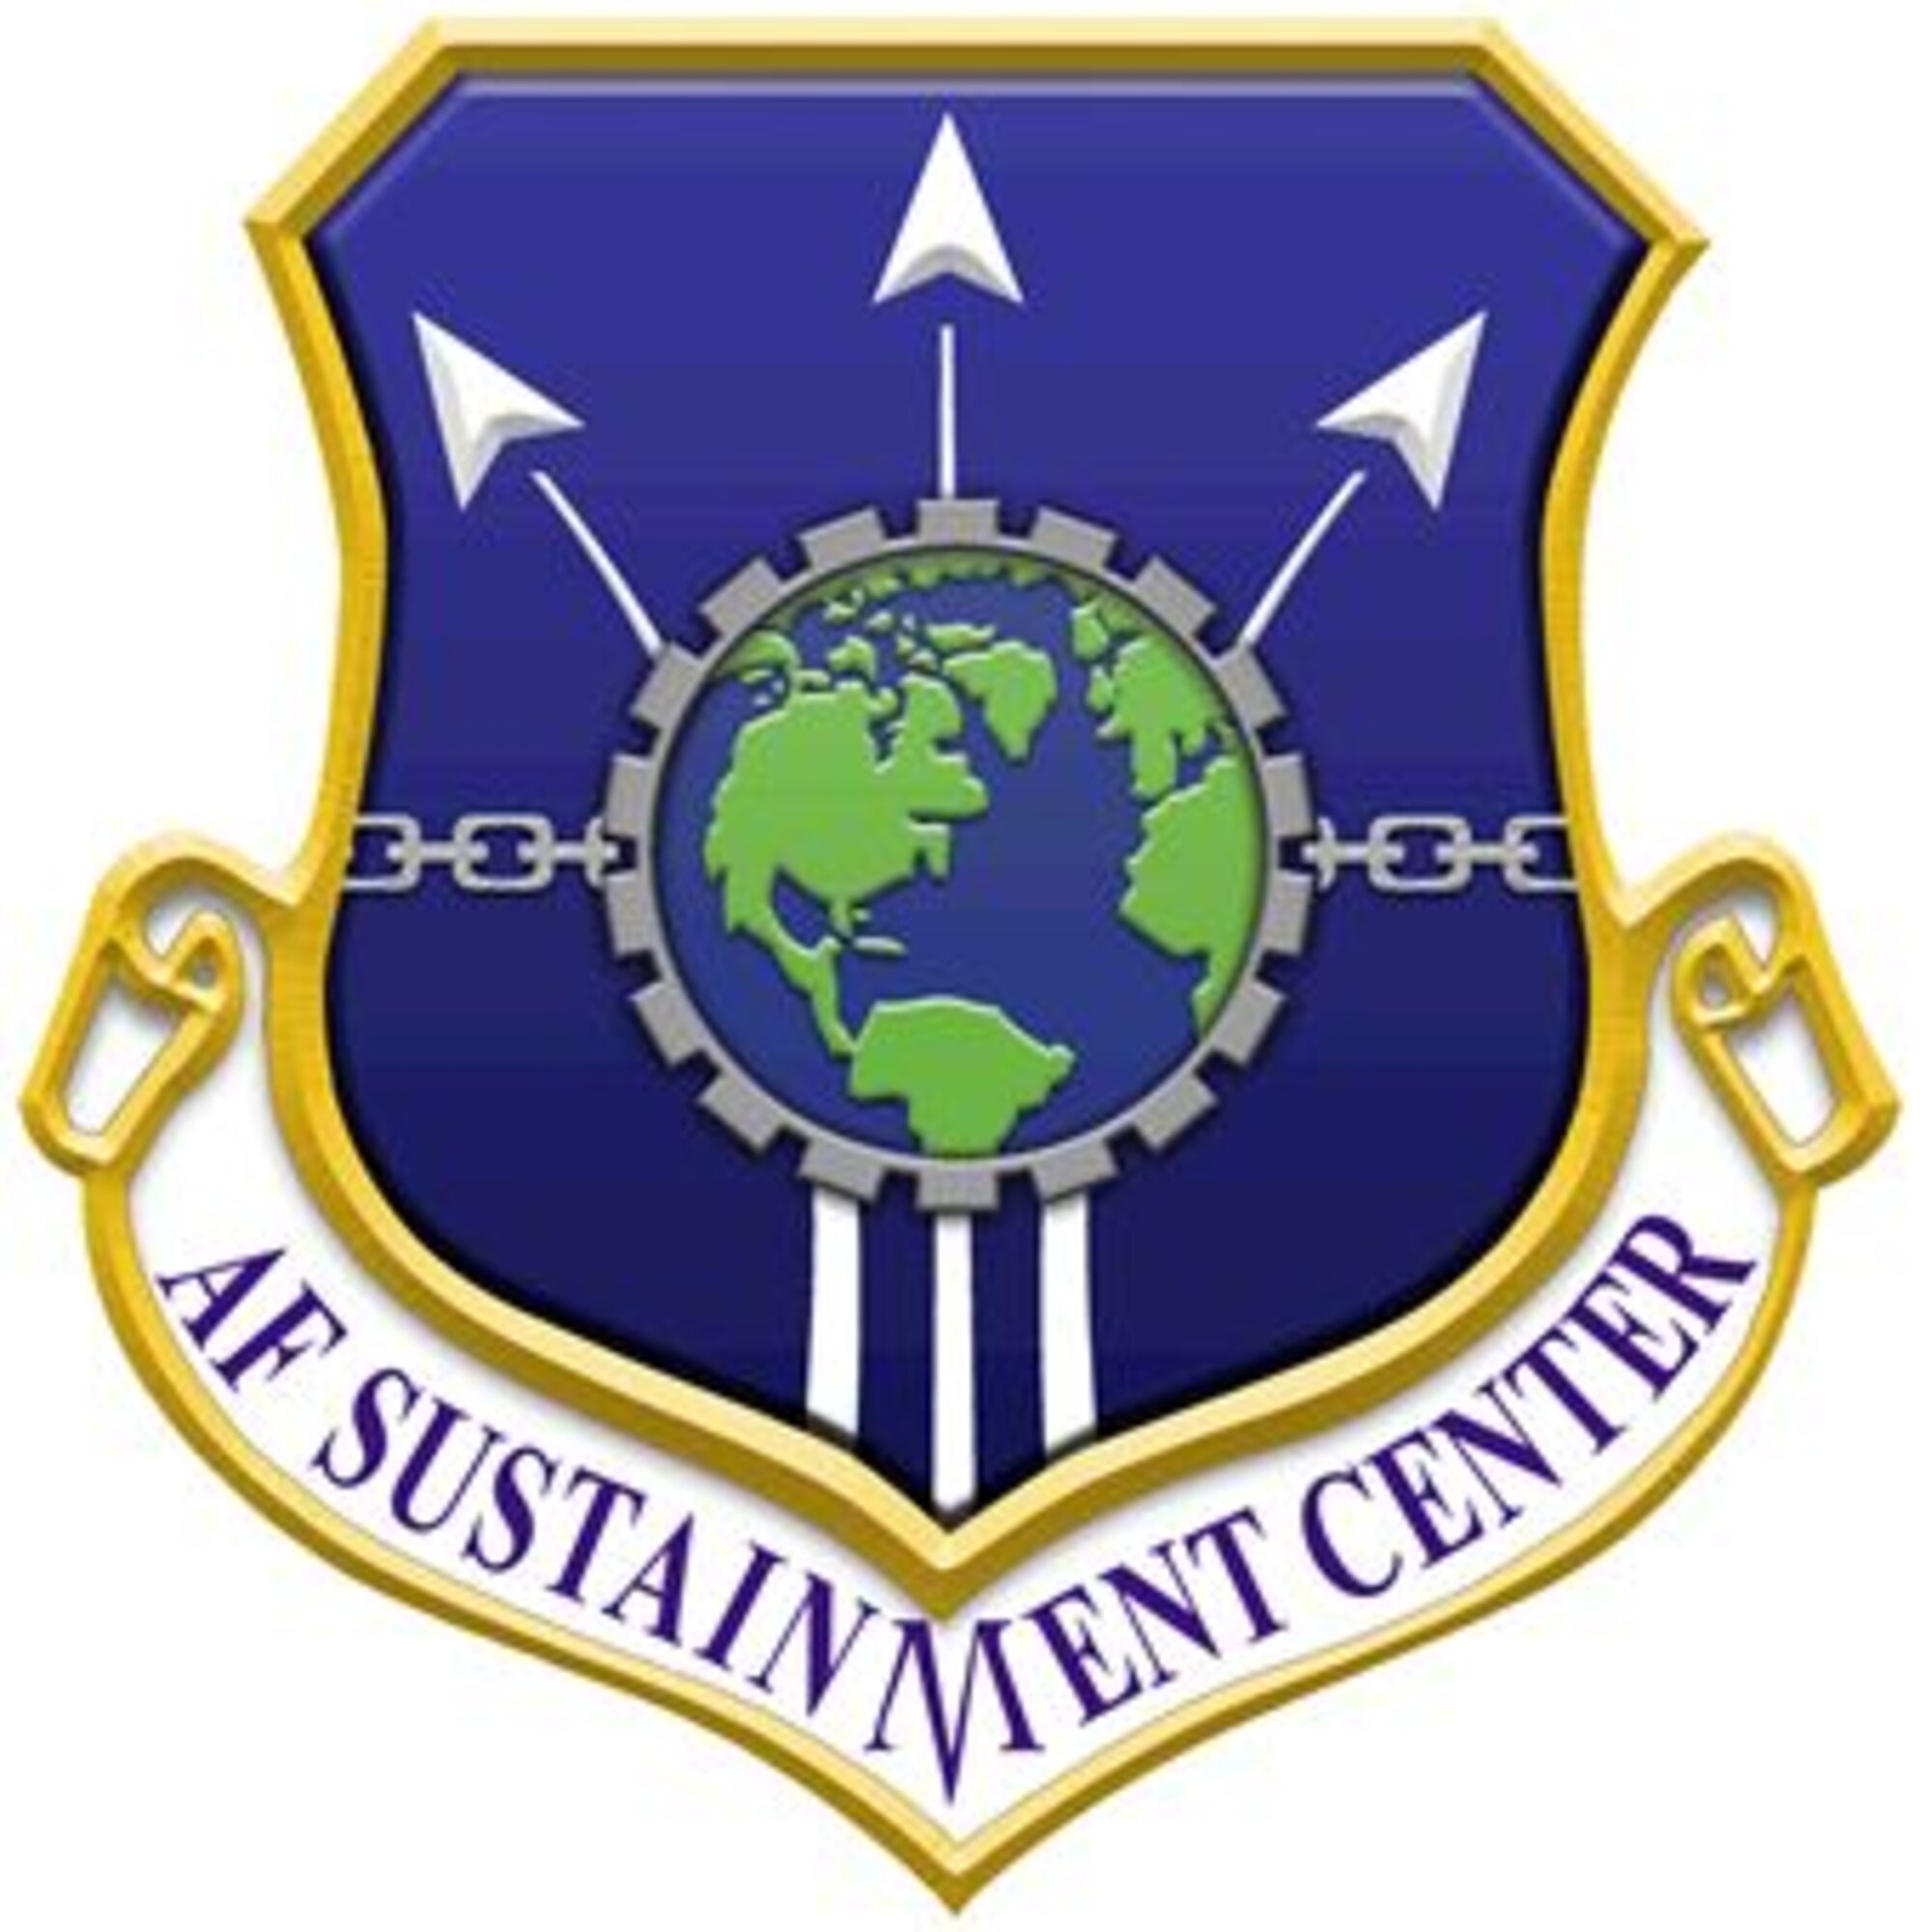 Air Force Sustainment Center Shield 